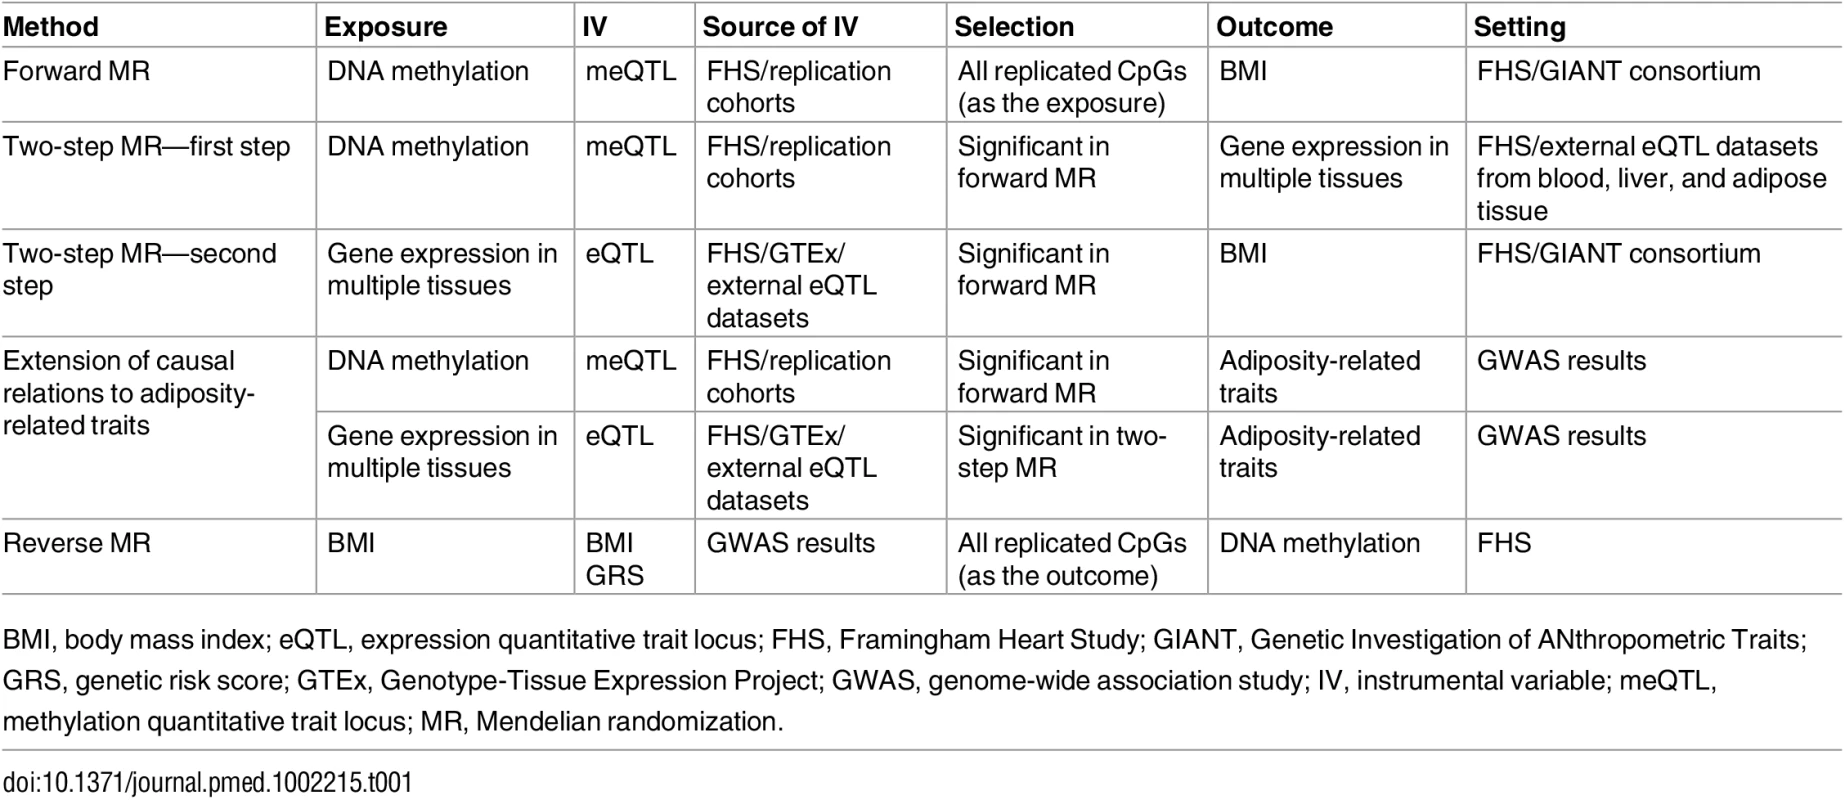 Schema of instrumental variable analyses conducted in order to infer the potential causal relations between DNA methylation, gene expression, BMI, and adiposity-related disease.